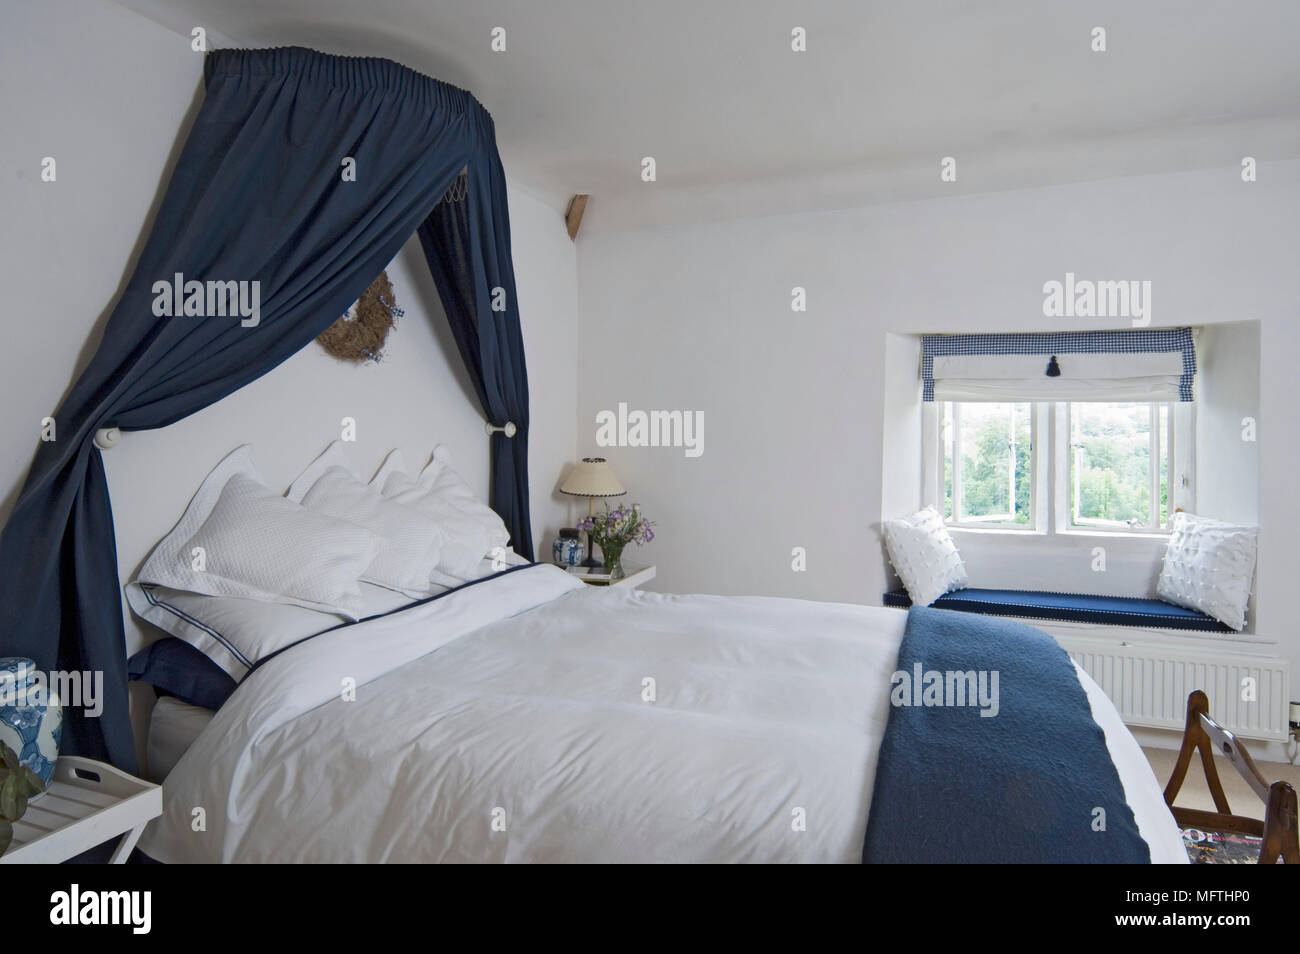 Double bed with fabric canopy and coordinating furnishings Stock Photo